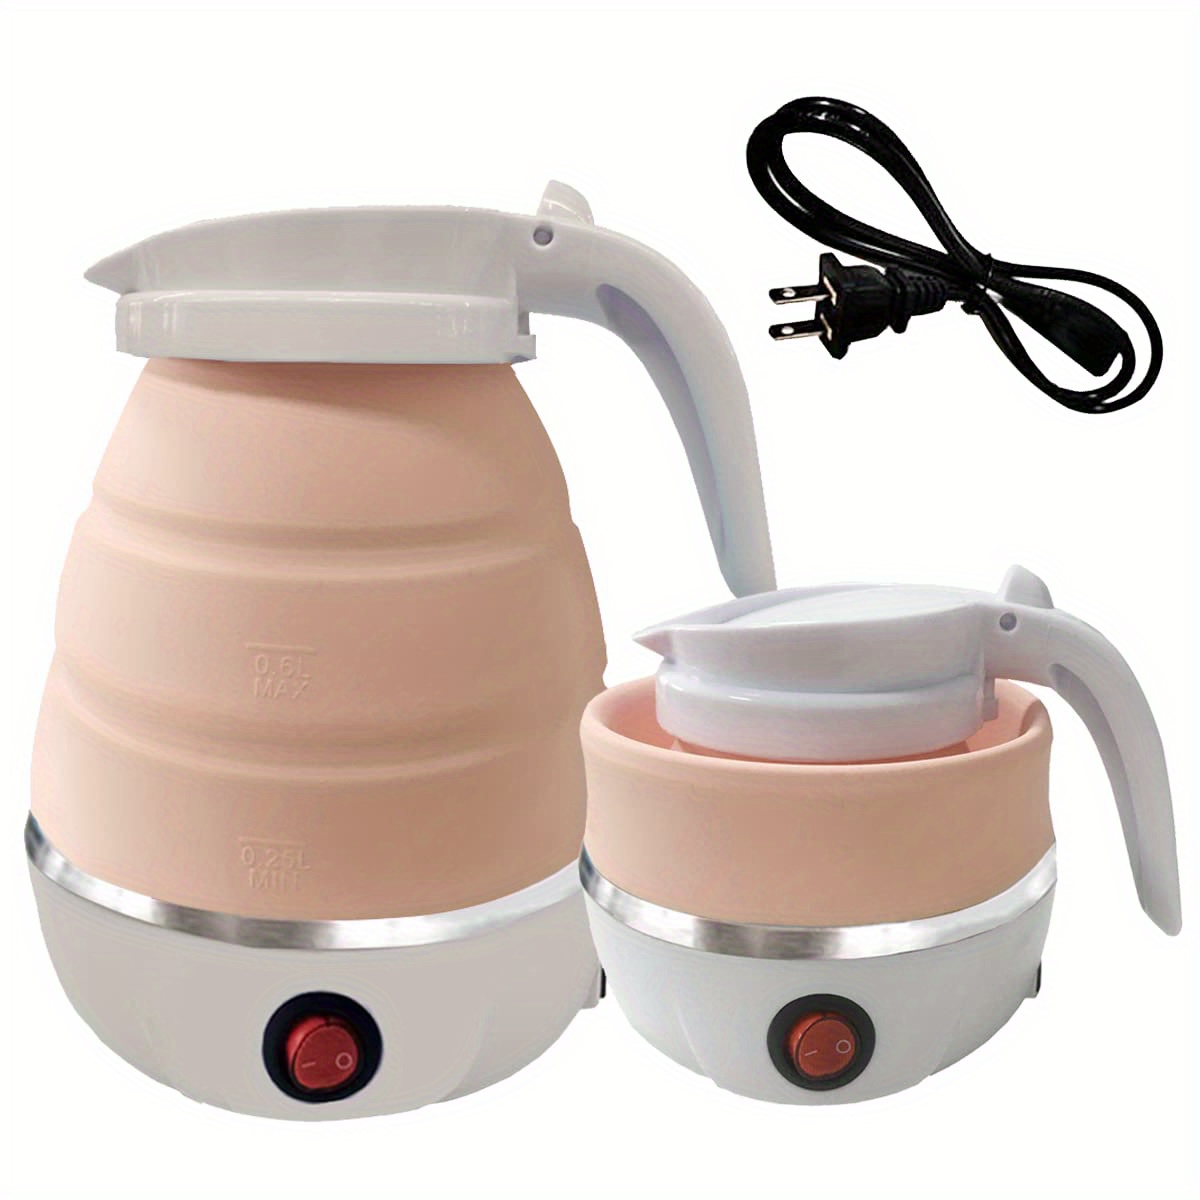 Foldable Travel Electric Kettle I25, Portable Boiling Insulation